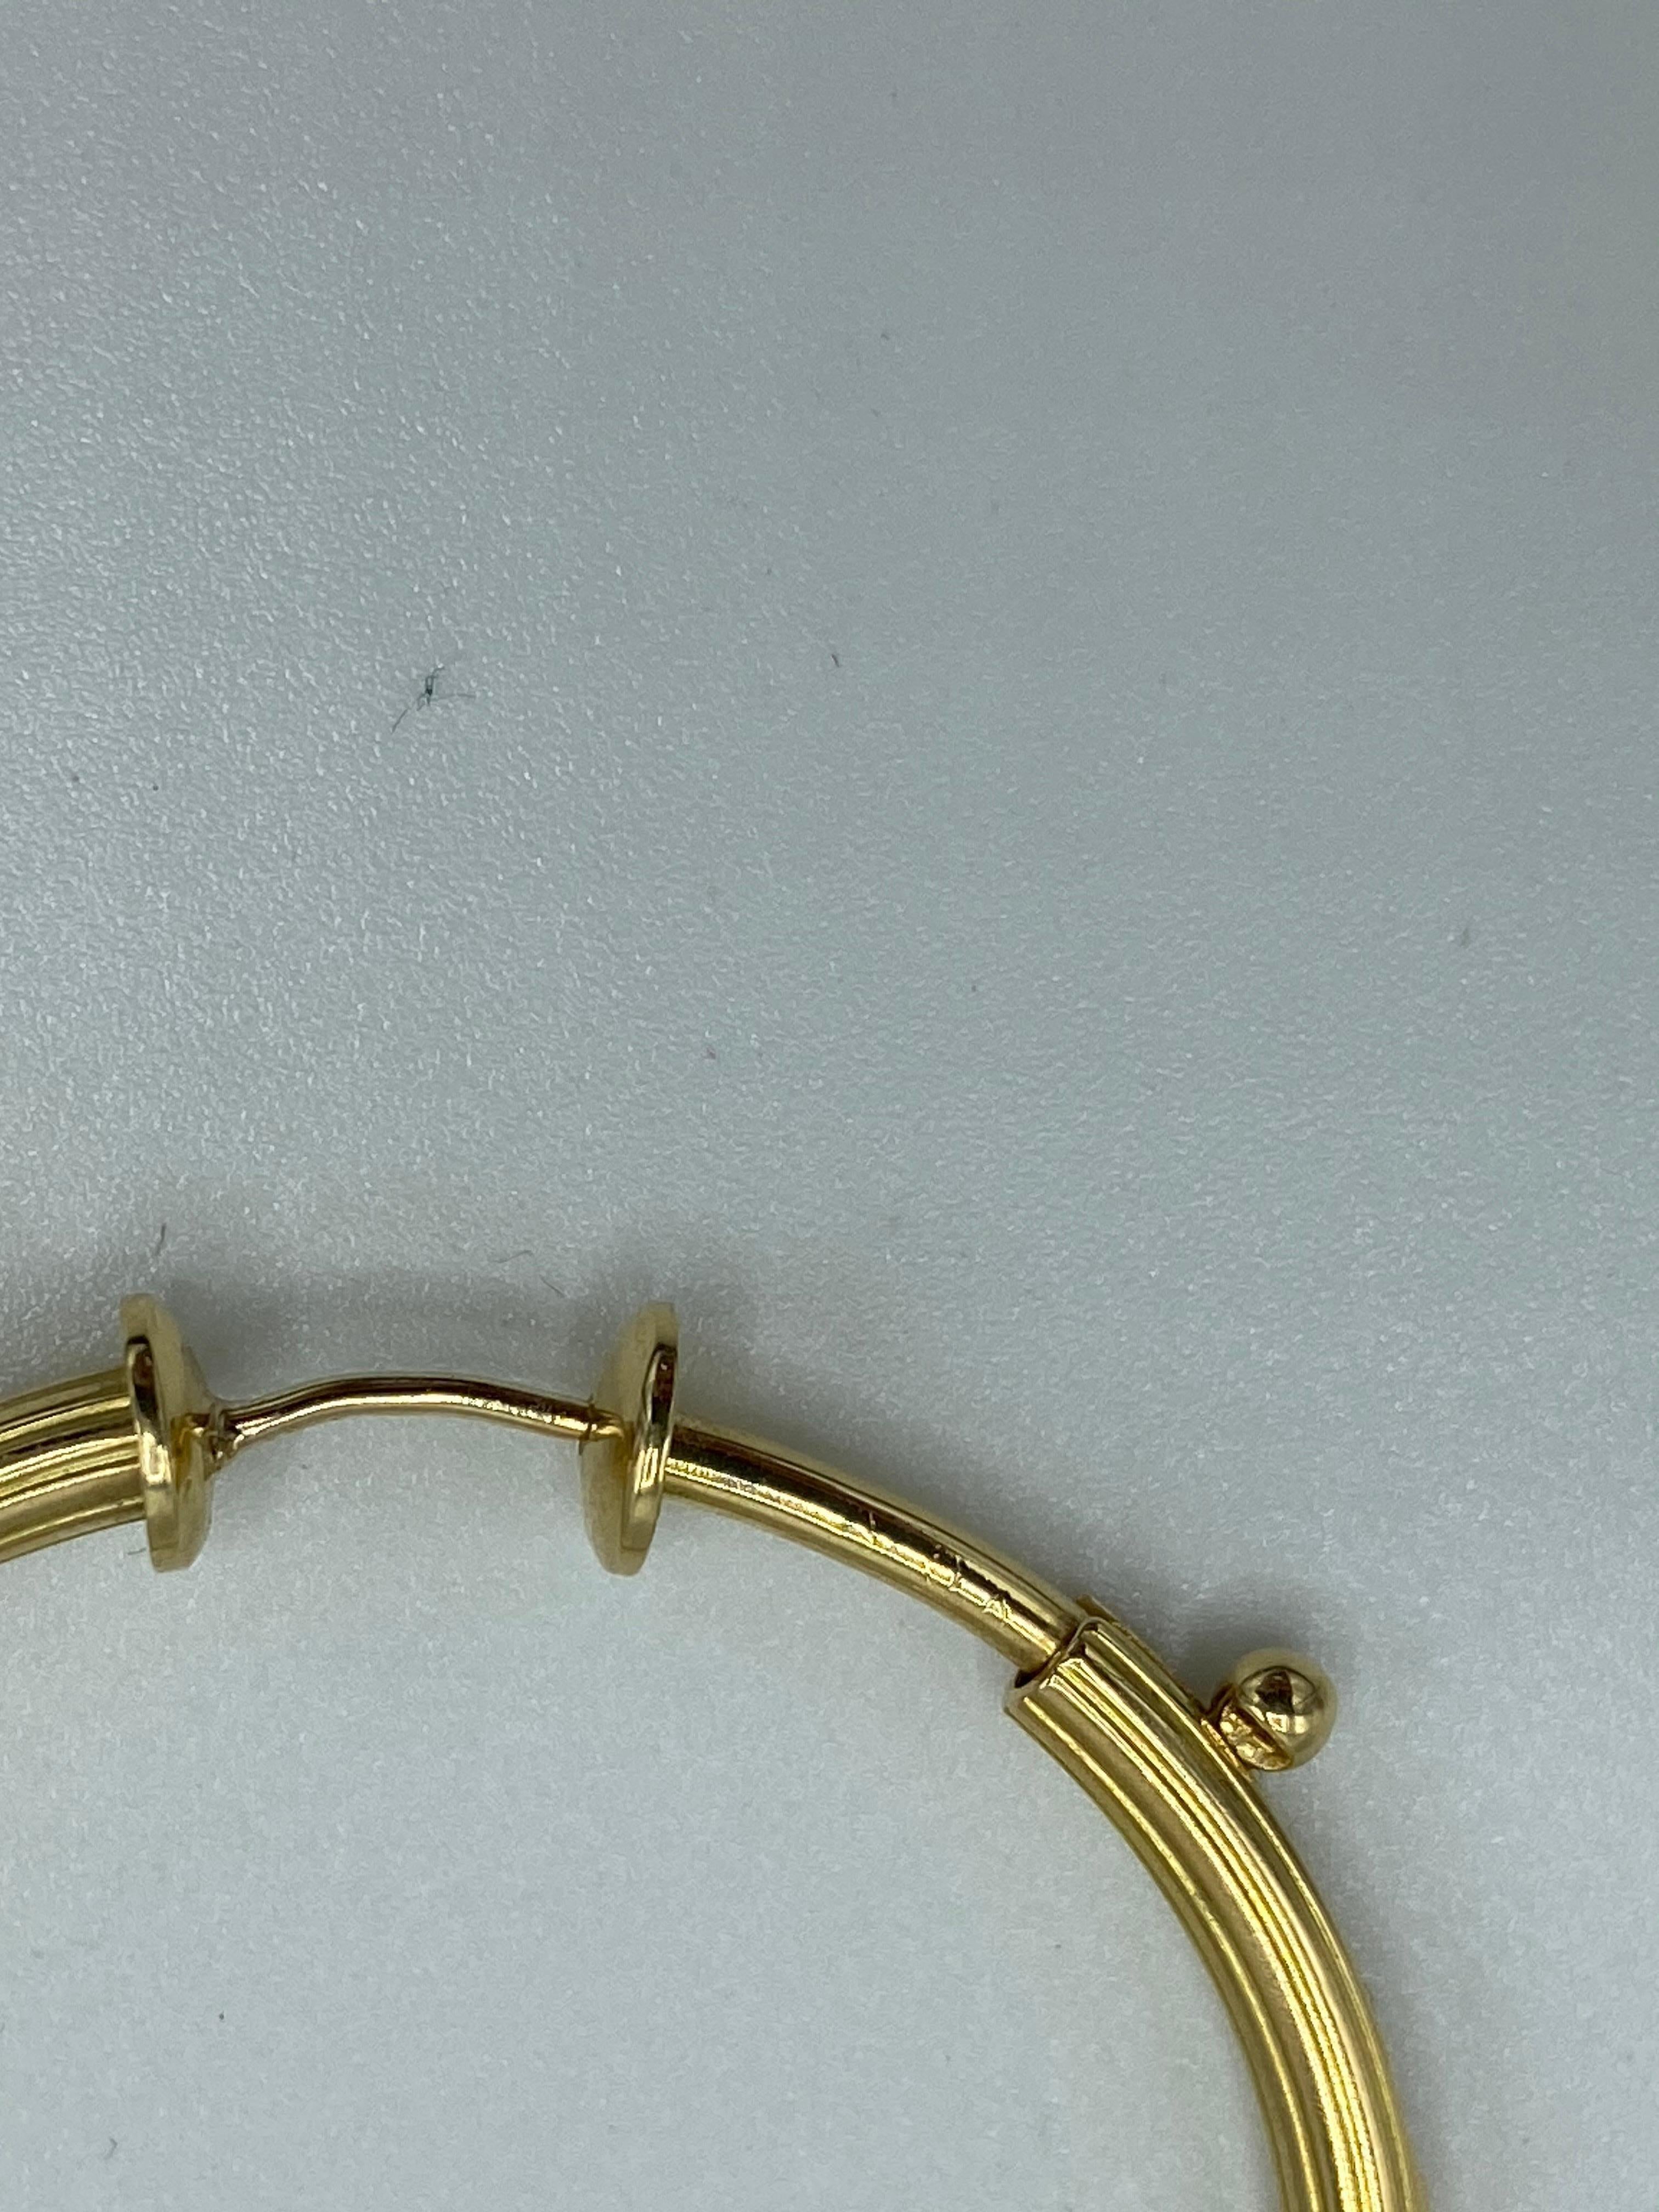 Van Cleef & Arpels Italy 18k Yellow Gold Hoop Earrings Vintage Circa 1970s





Here is your chance to purchase a beautiful and highly collectible designer pair of earrings.  Truly a great piece at a great price! 



Weight: 14.3 grams



Condition: